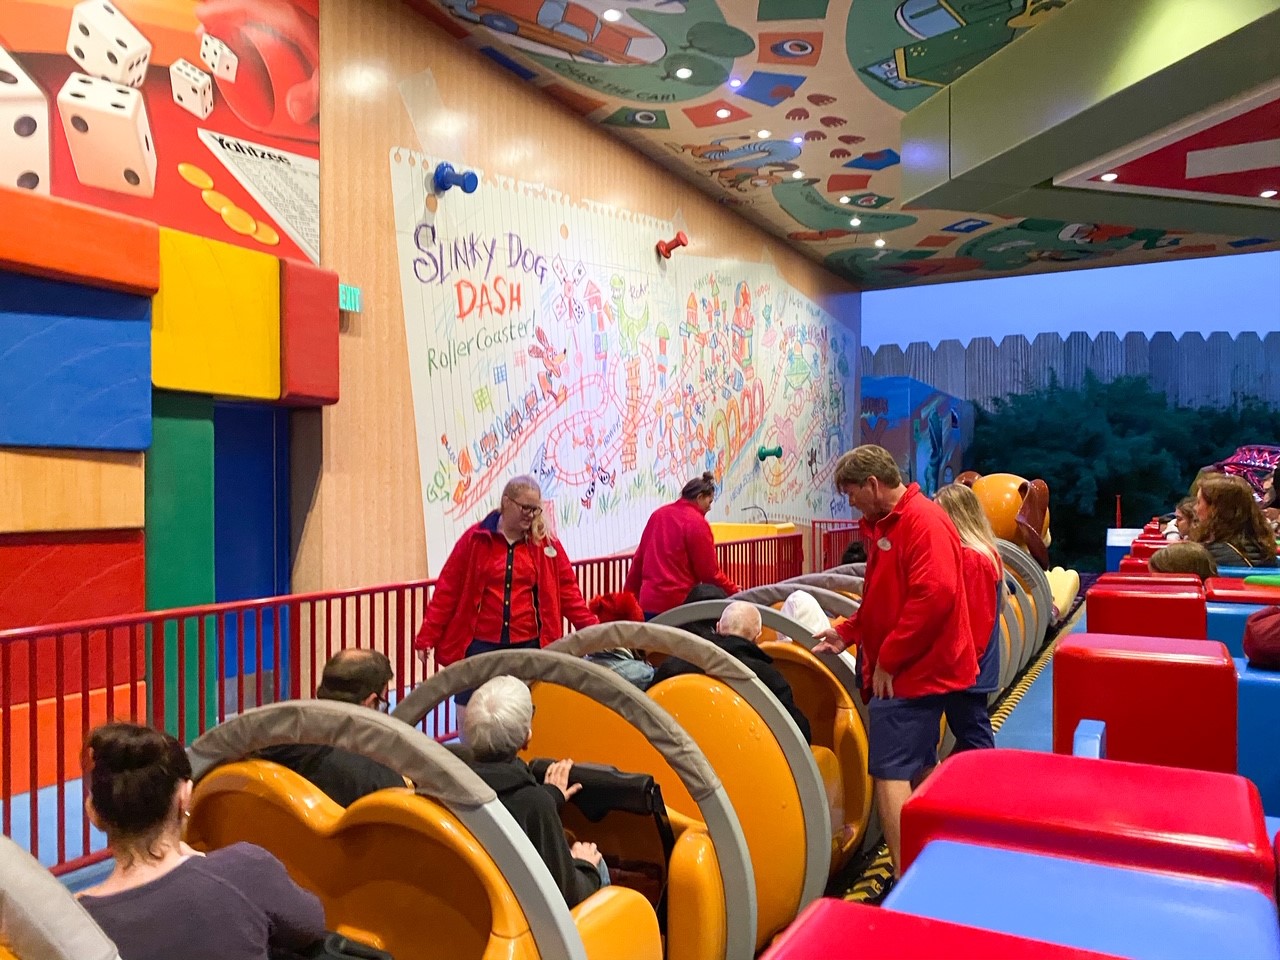 photo of people boarding slinky dog dash; a definite must, even if you only have one day in Hollywood Studios